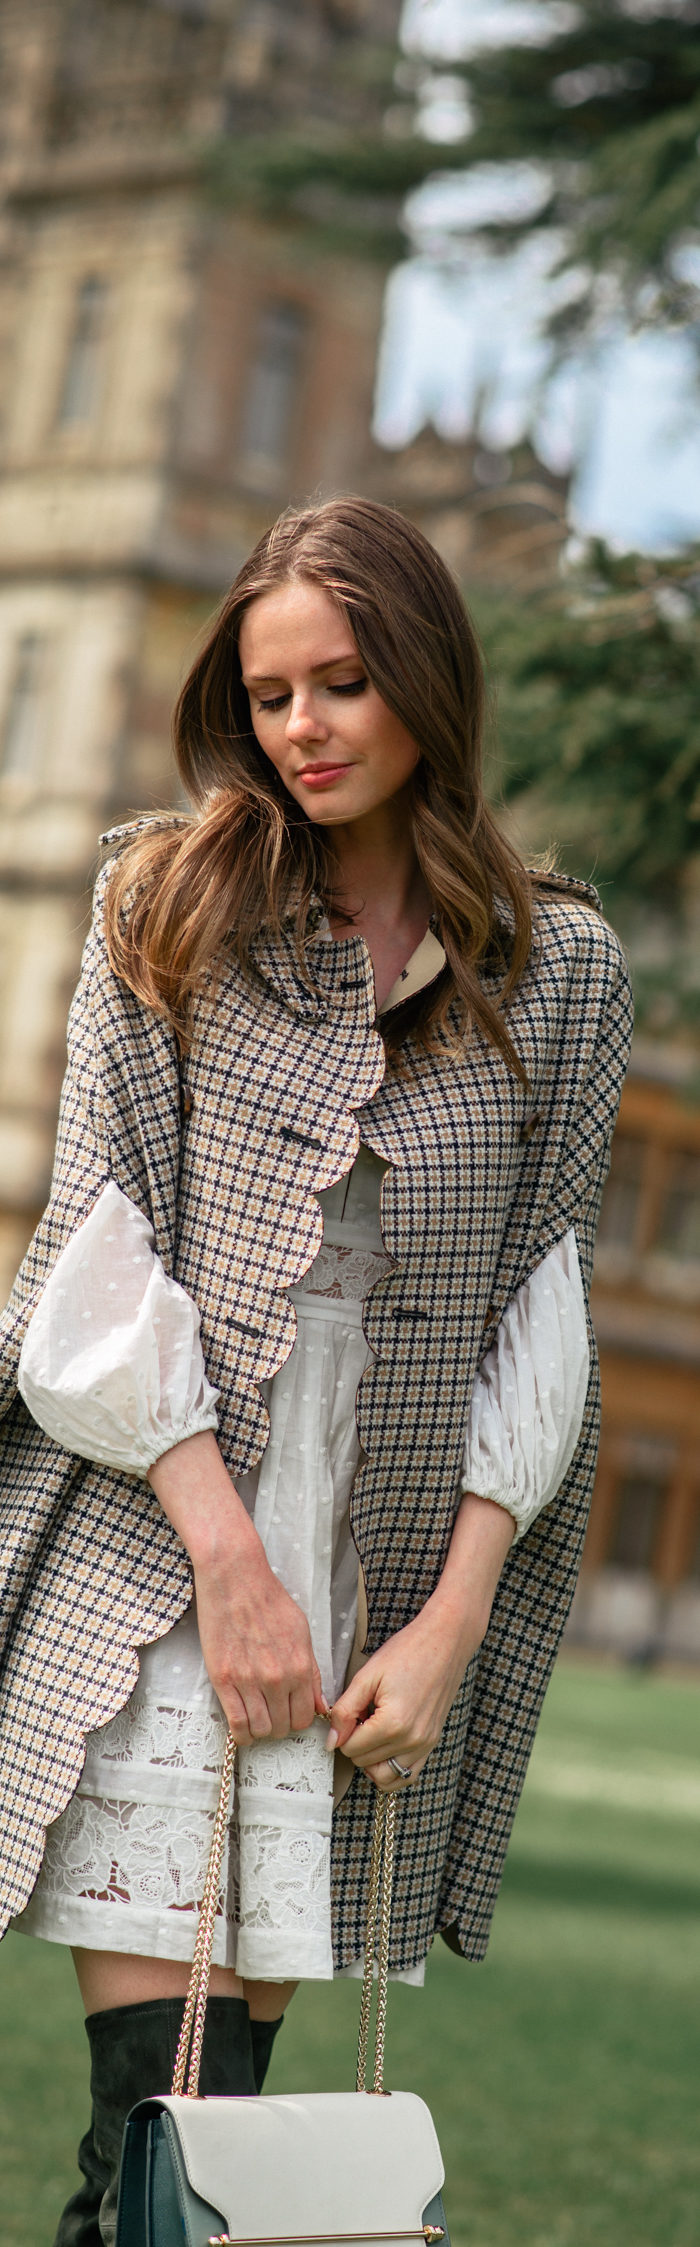 Alyssa Campanella of The A List blog visits Downton Abbey locations at Highclere Castle wearing RED Valentino plaid cape and Strathberry East West bag